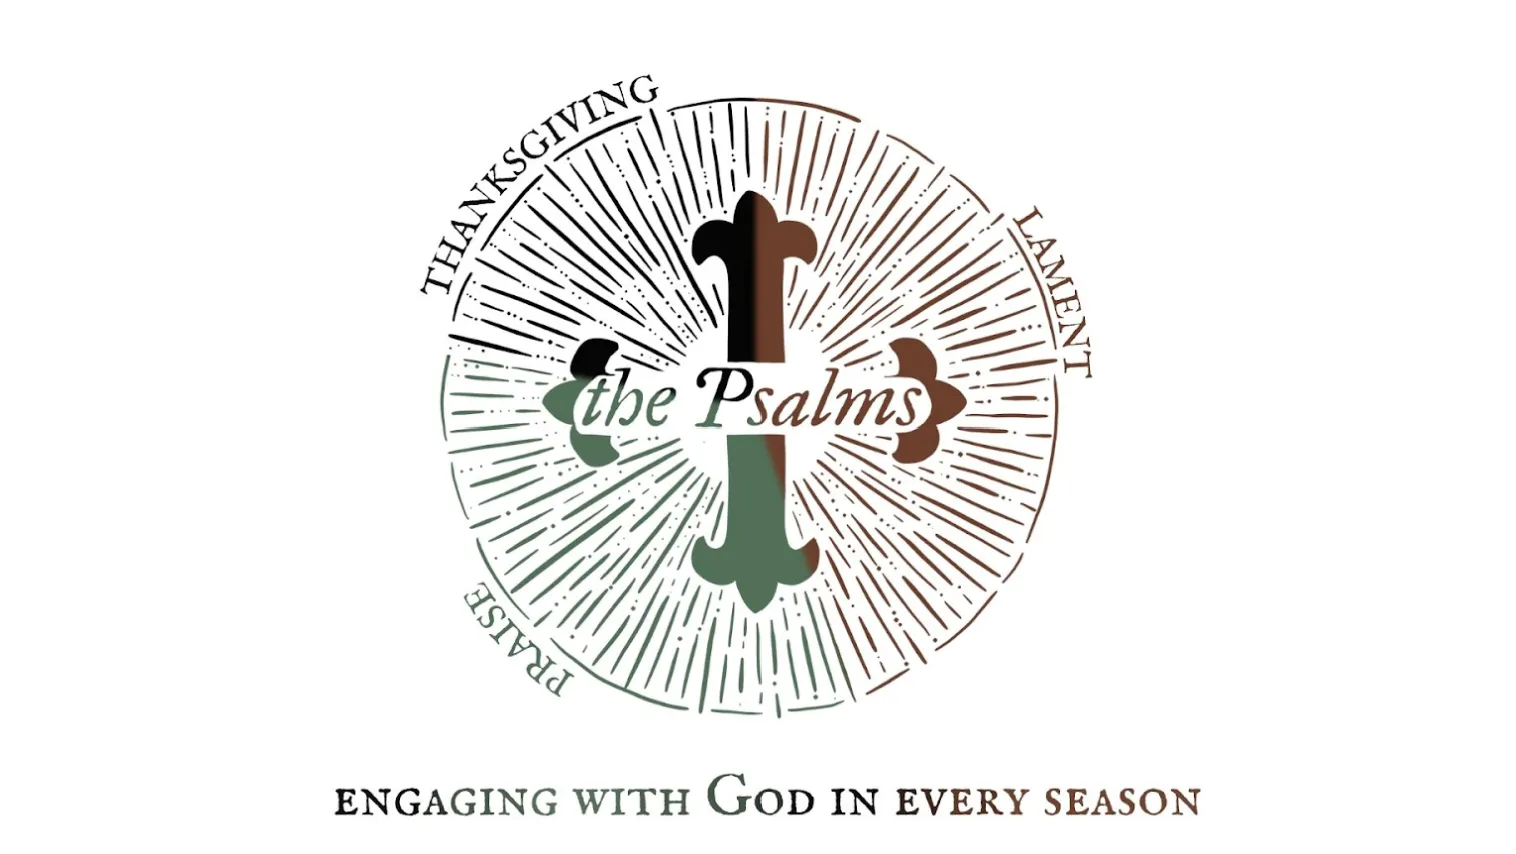 DiscipleMakers Psalms logo, "Engaging with God in Every Season"